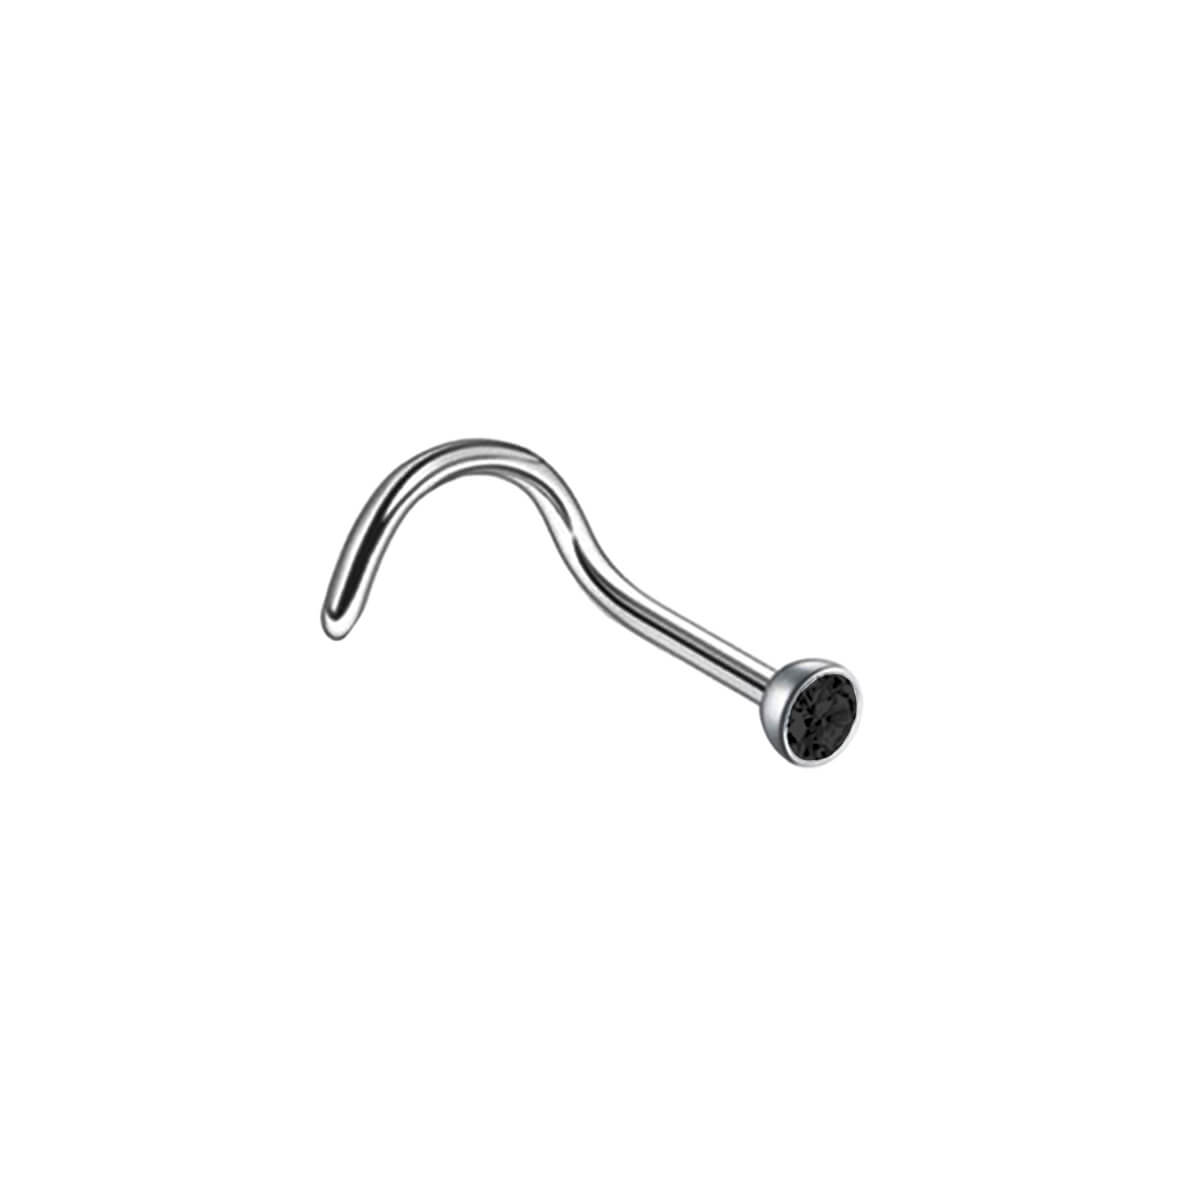 Spiral nose tube with artificial diamond 0.8mm (Steel 316L)